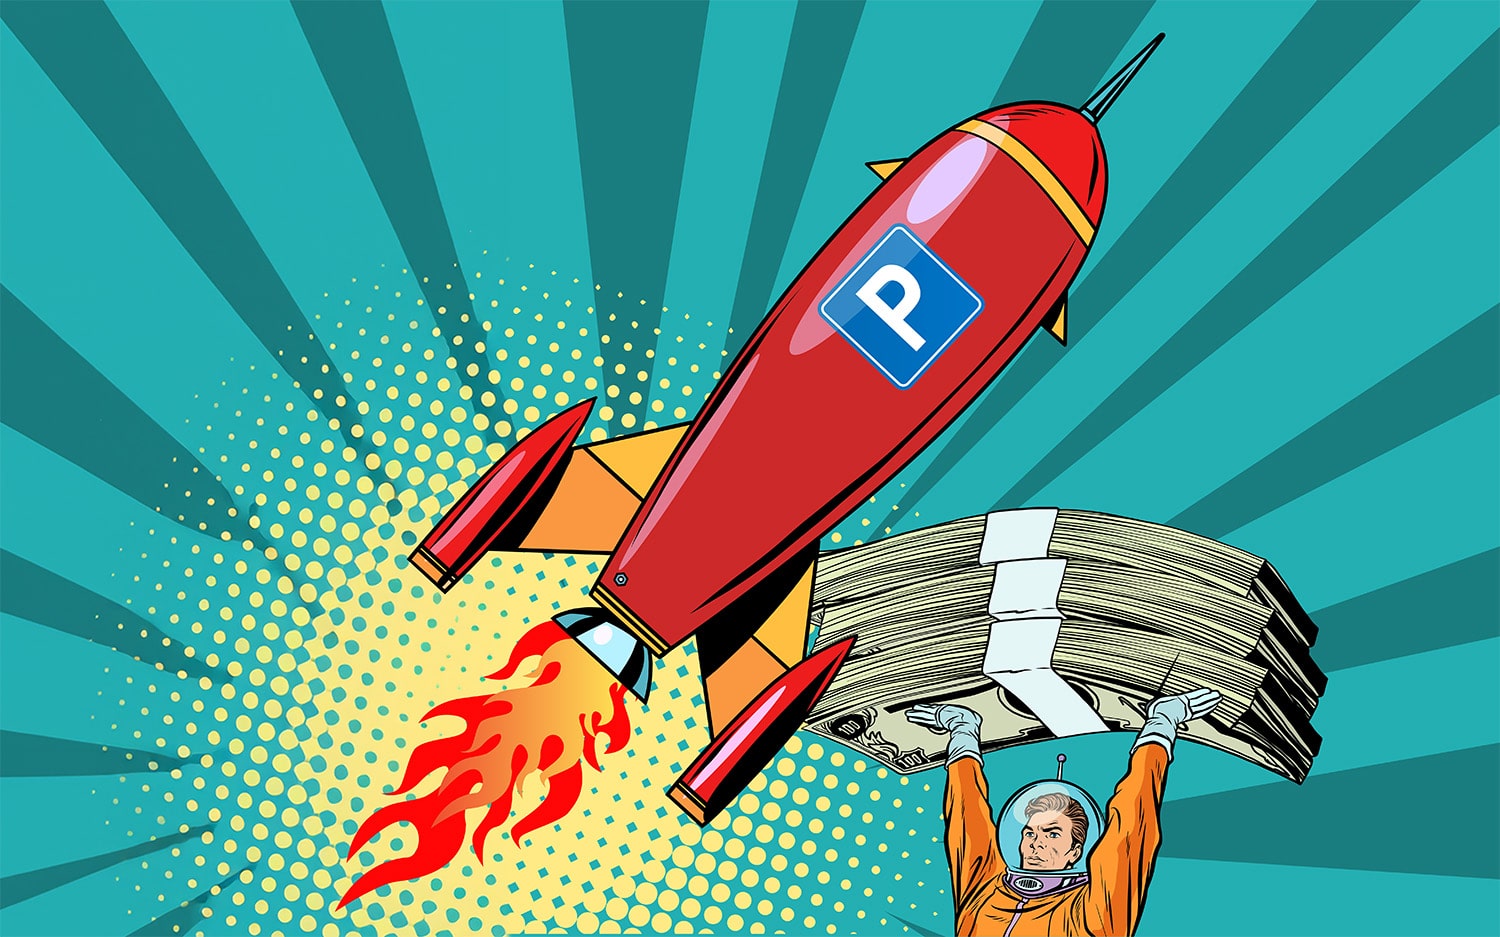 Retro comic style image of a rocket with a parking sign, and astronaut with money.